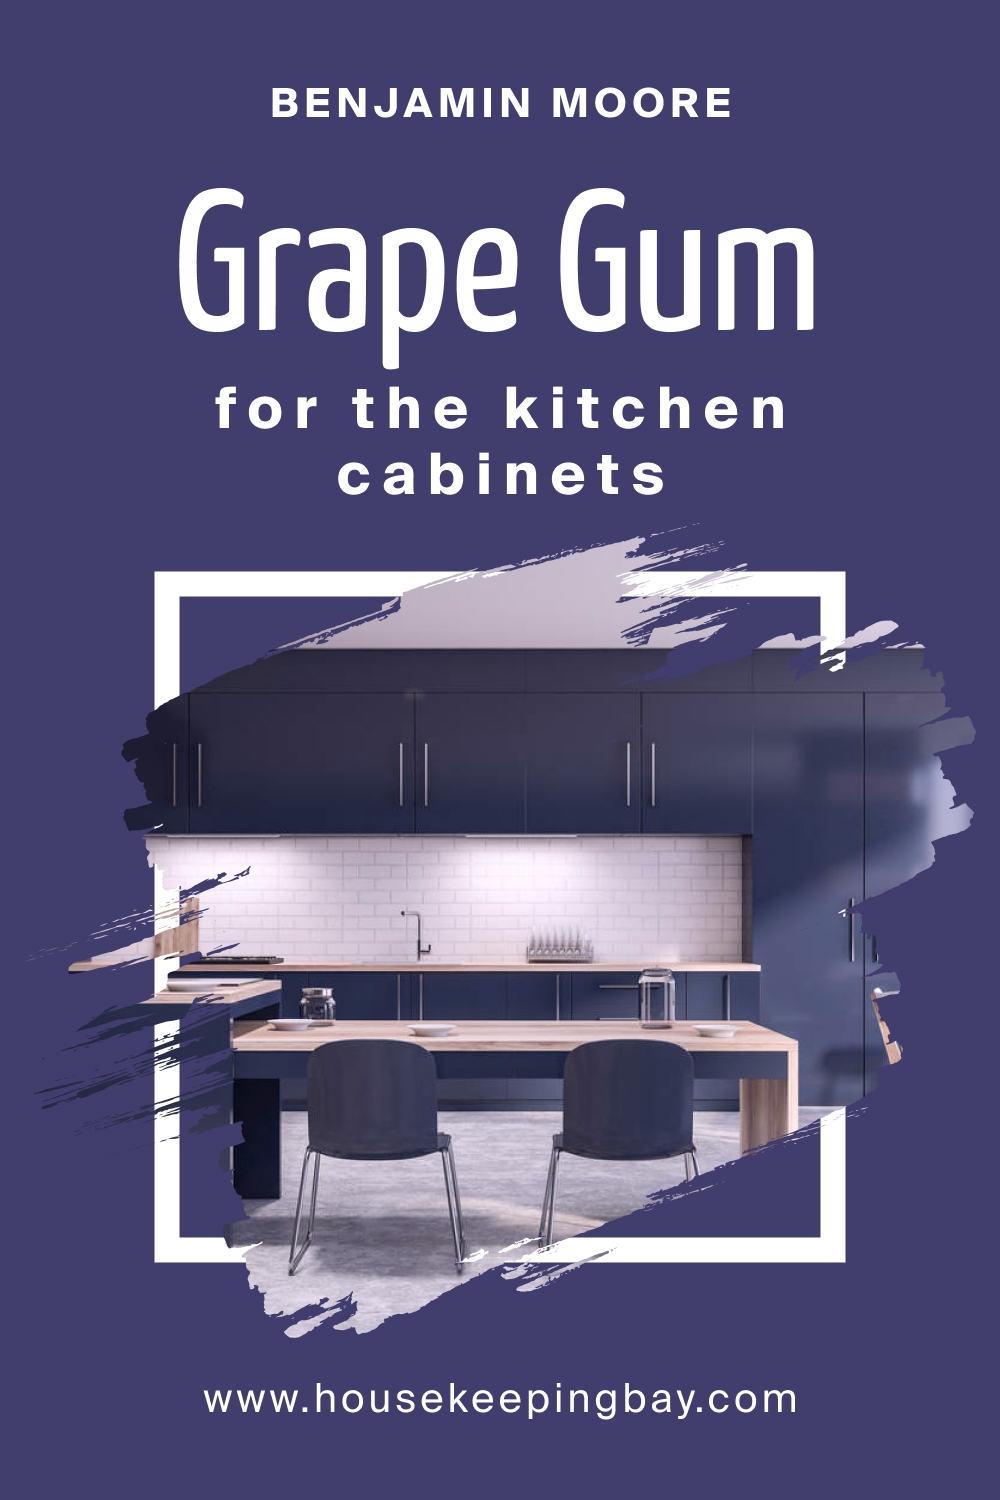 How to Use BM Grape Gum 2068-20 on the Kitchen Cabinets